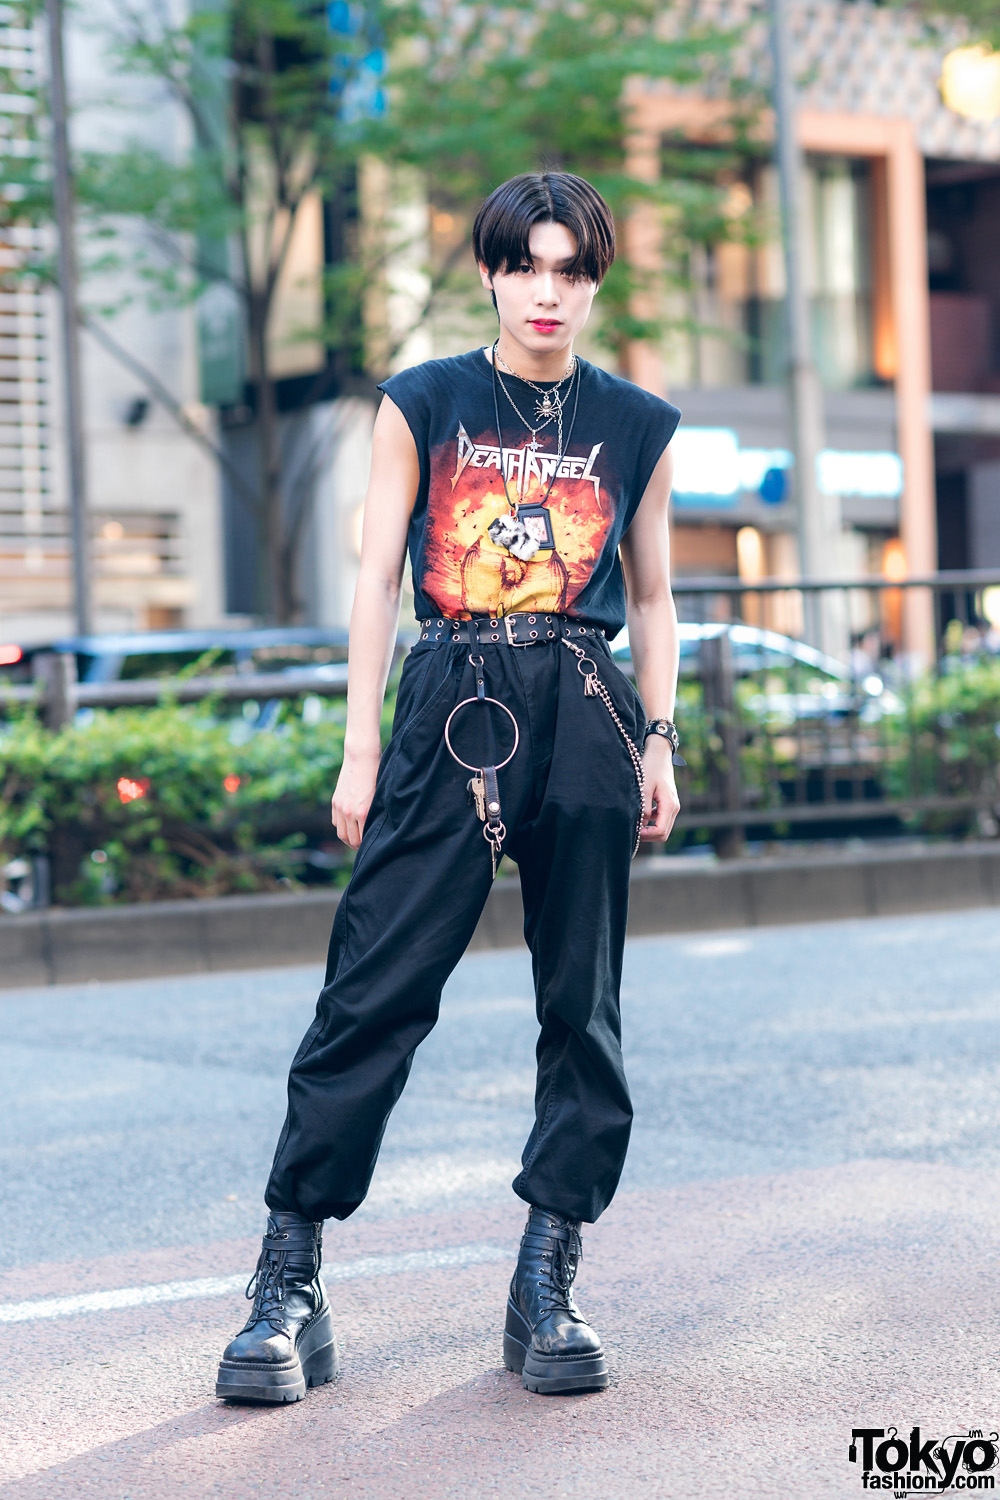 Harajuku Guy in Death Angel T-Shirt, Chain Wallet, Spider Necklace, Demonia & Faith Tokyo